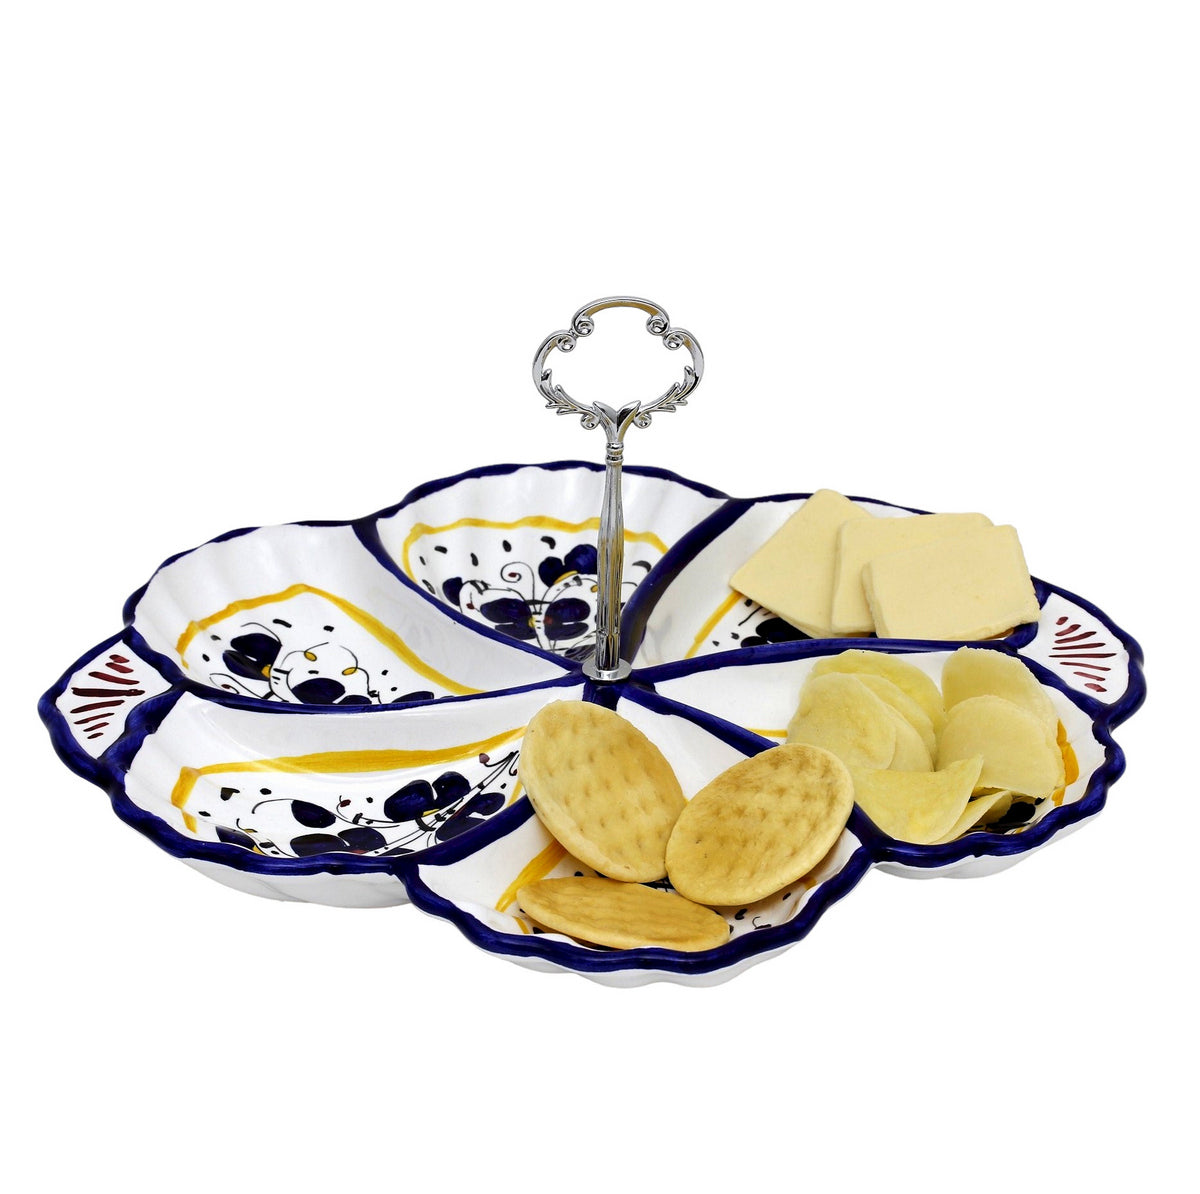 ORVIETO BLUE ROOSTER: Handled Tidbit Snack Tray Fiore/Shell server - Six Compartments - Artistica.com